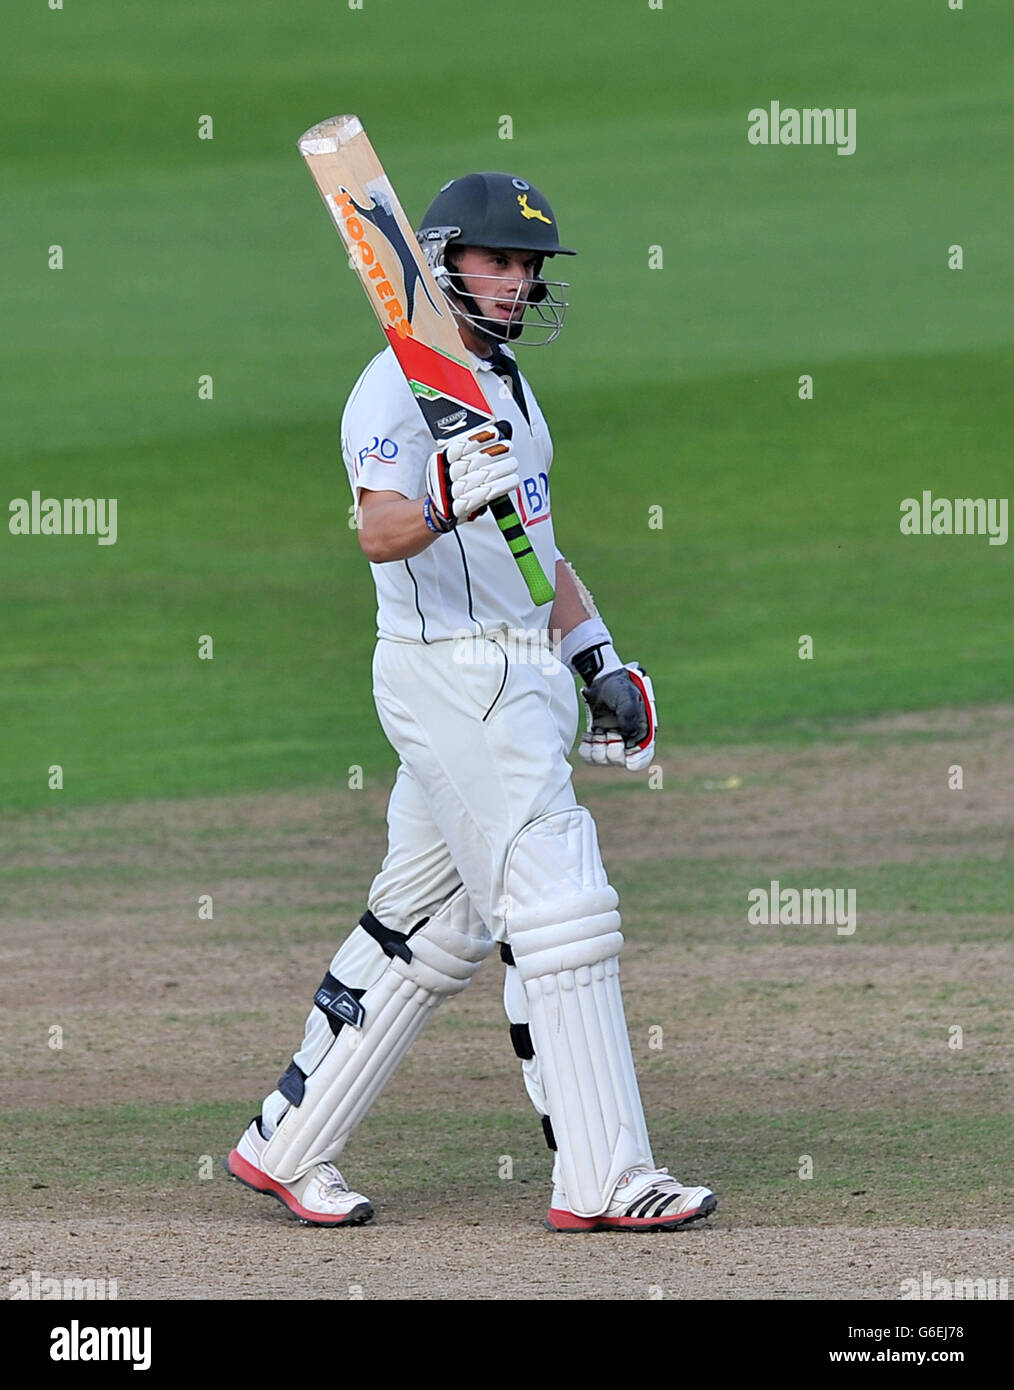 Norringhamshire's Steven Mullaney celebrates reaching his half century during the LV= County Championship, Division One match at Trent Bridge, Nottingham. Stock Photo